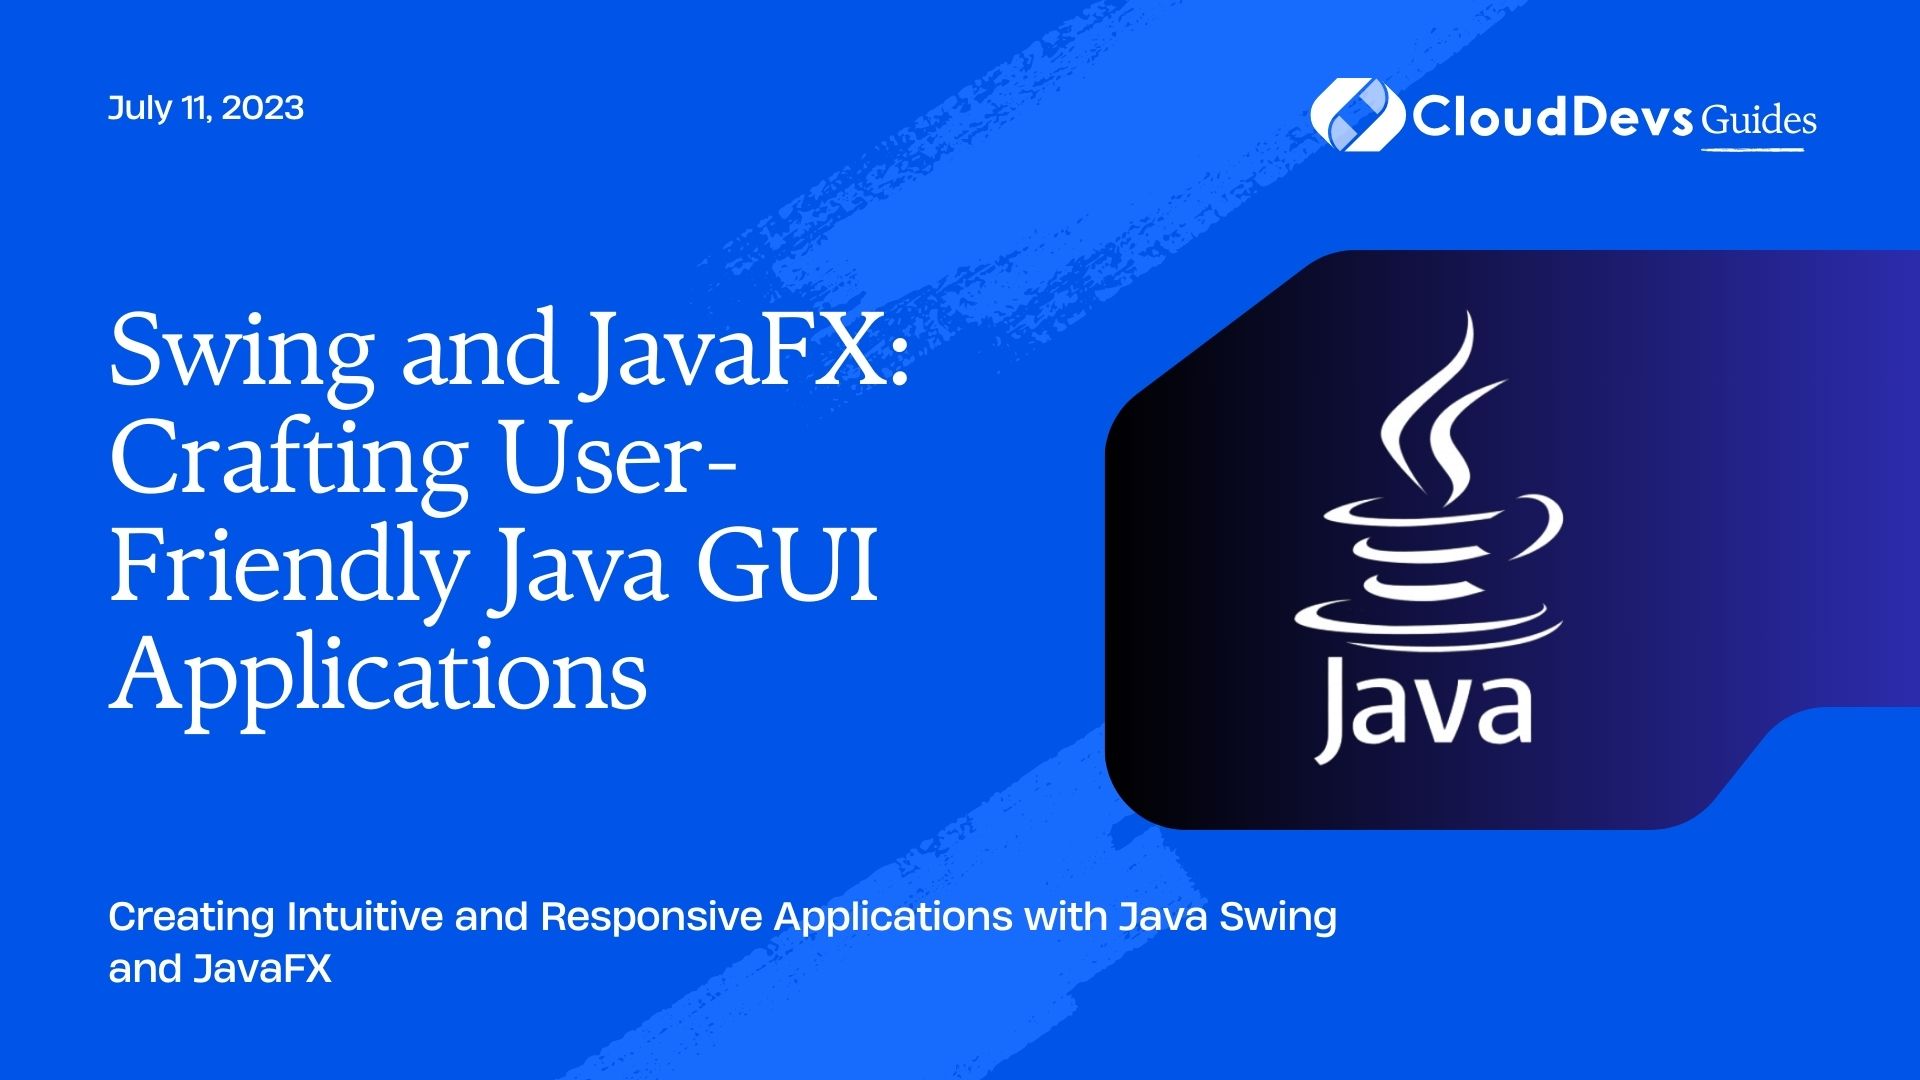 Swing and JavaFX: Crafting User-Friendly Java GUI Applications